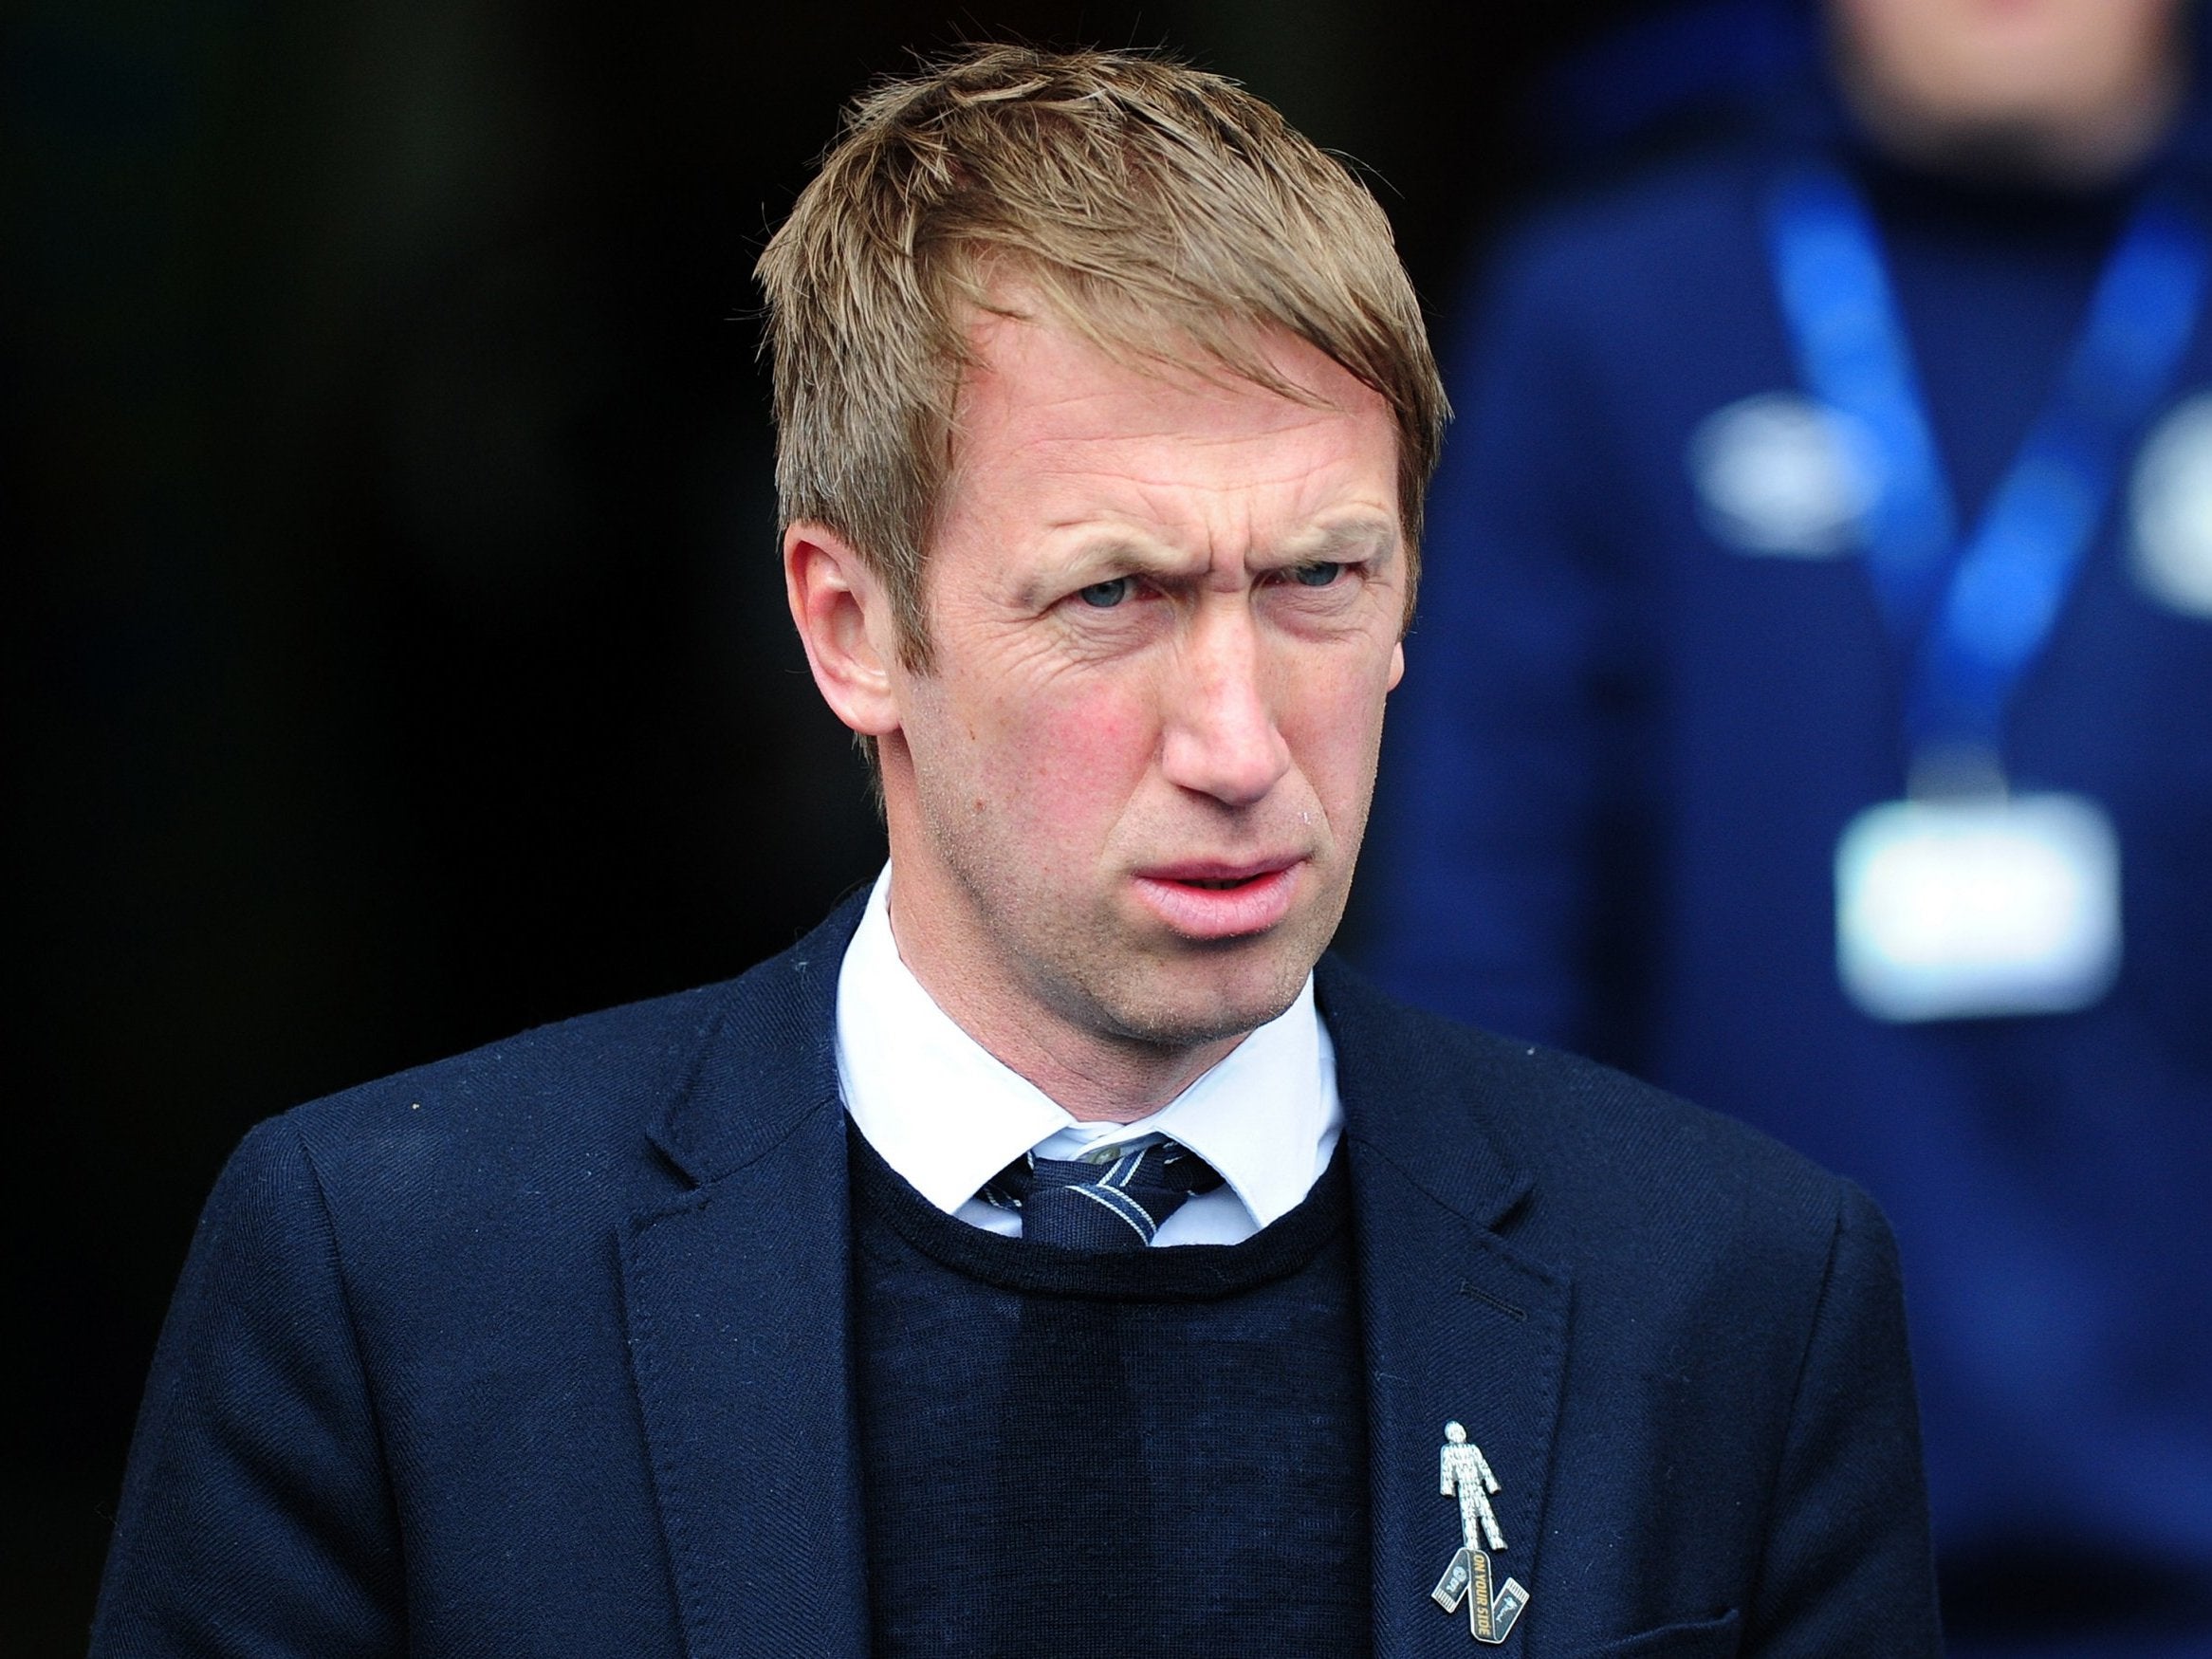 Next Brighton manager: Swansea's Graham Potter is leading candidate to replace Chris Hughton